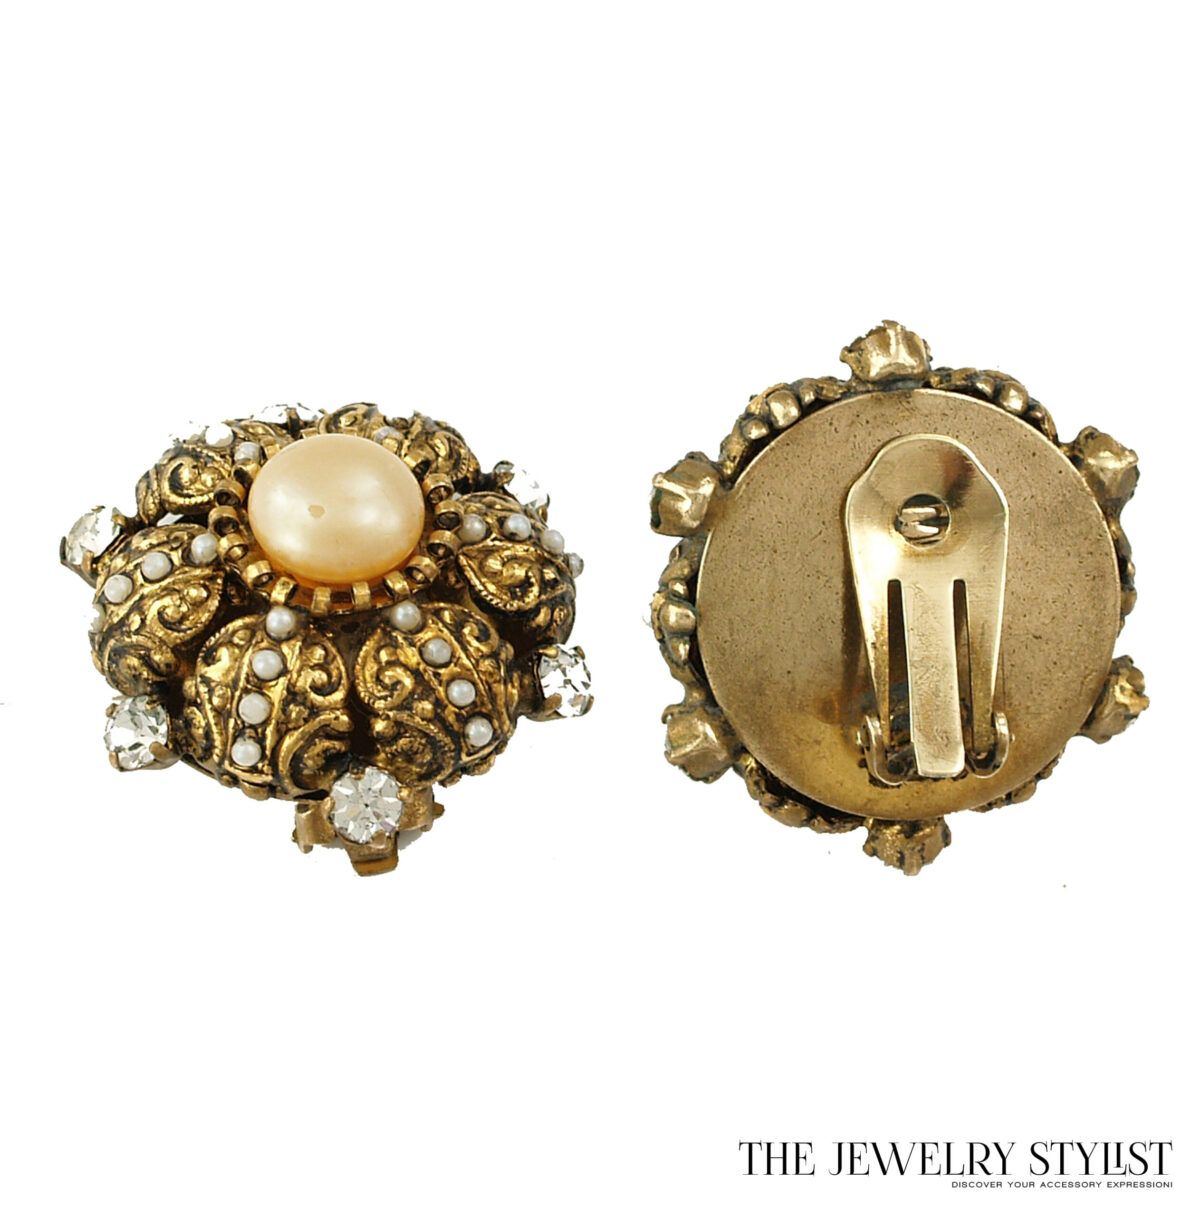 Toledo-style earrings with large center faux pearl.